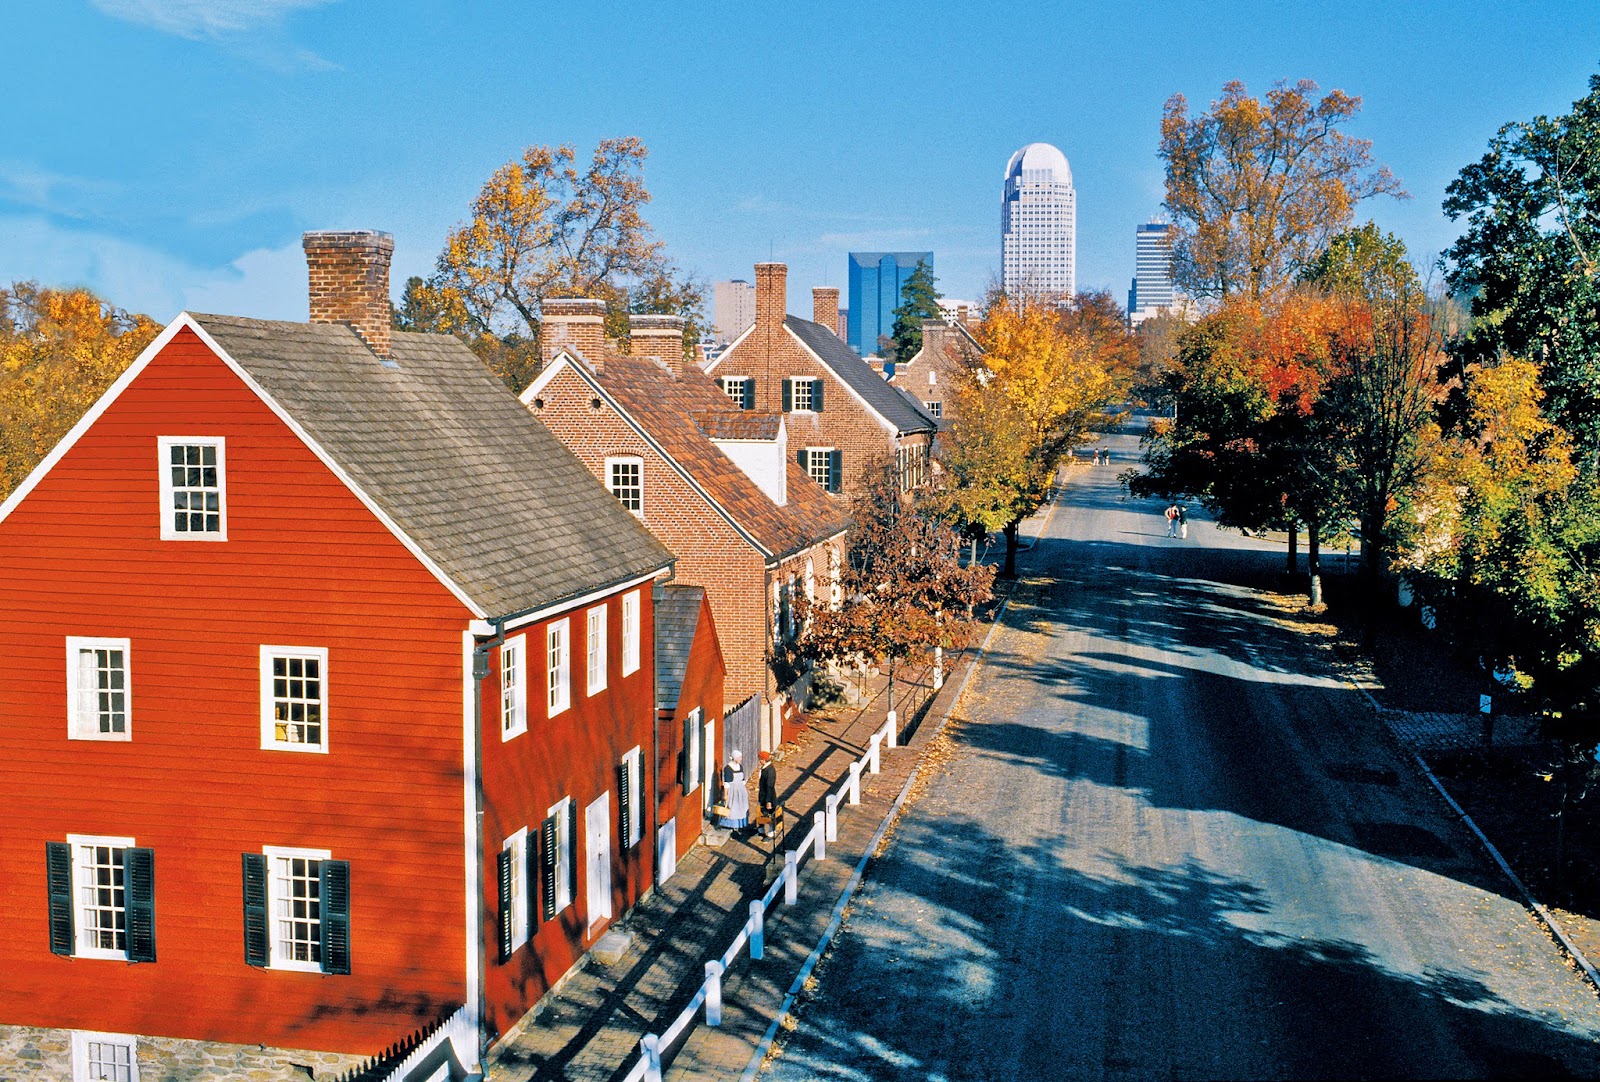 The State has conserved and safeguarded 15 historic communities in North Carolina.